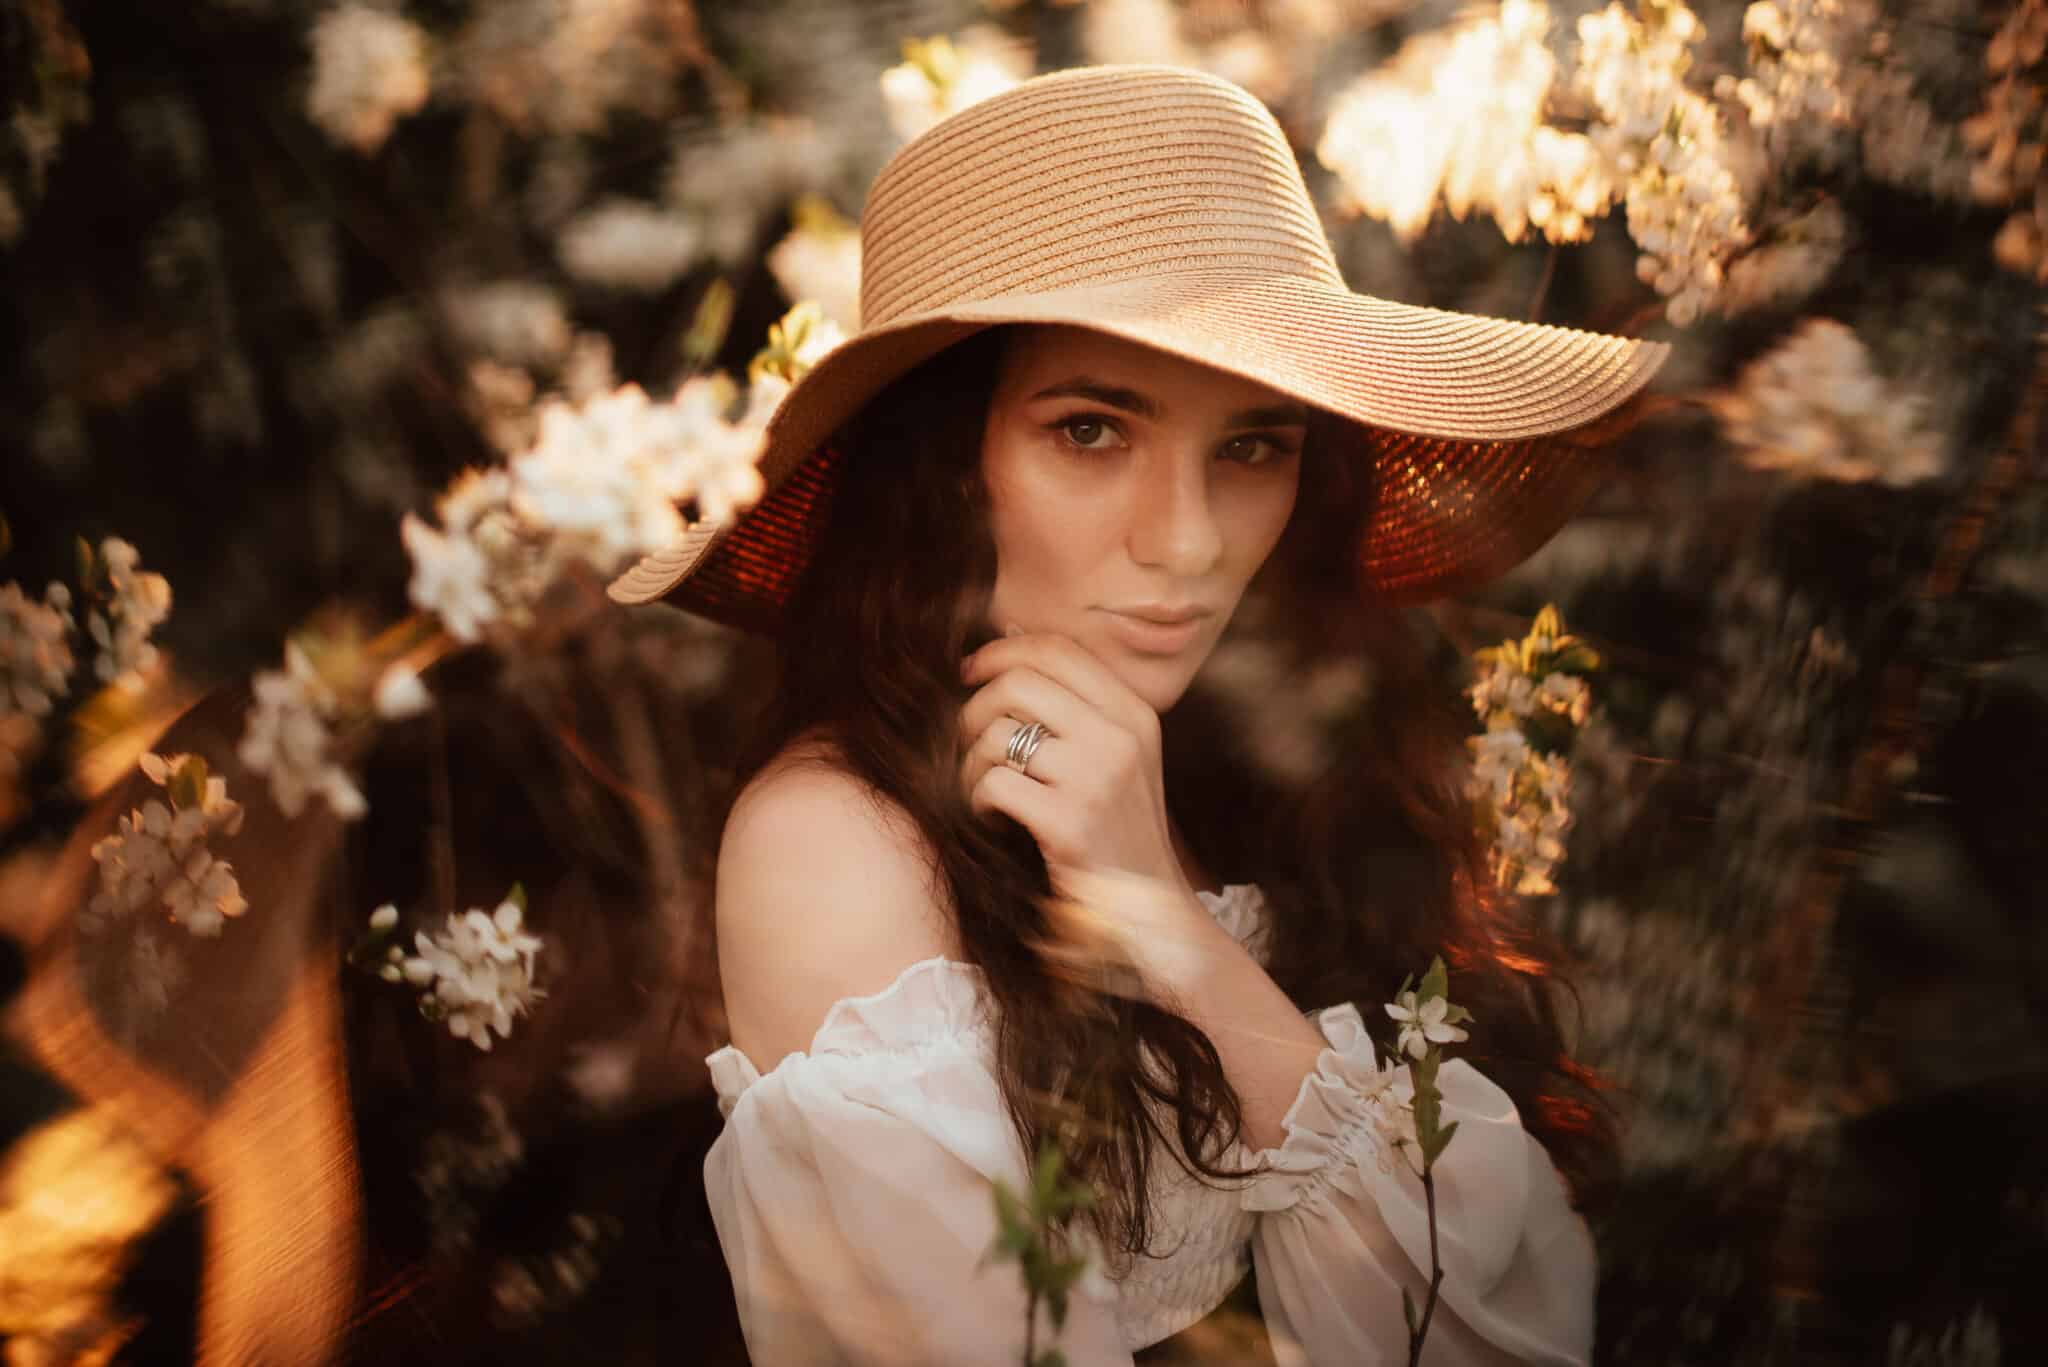 Portrait of a romantic girl in a blooming garden with elements of phantasmagoria.